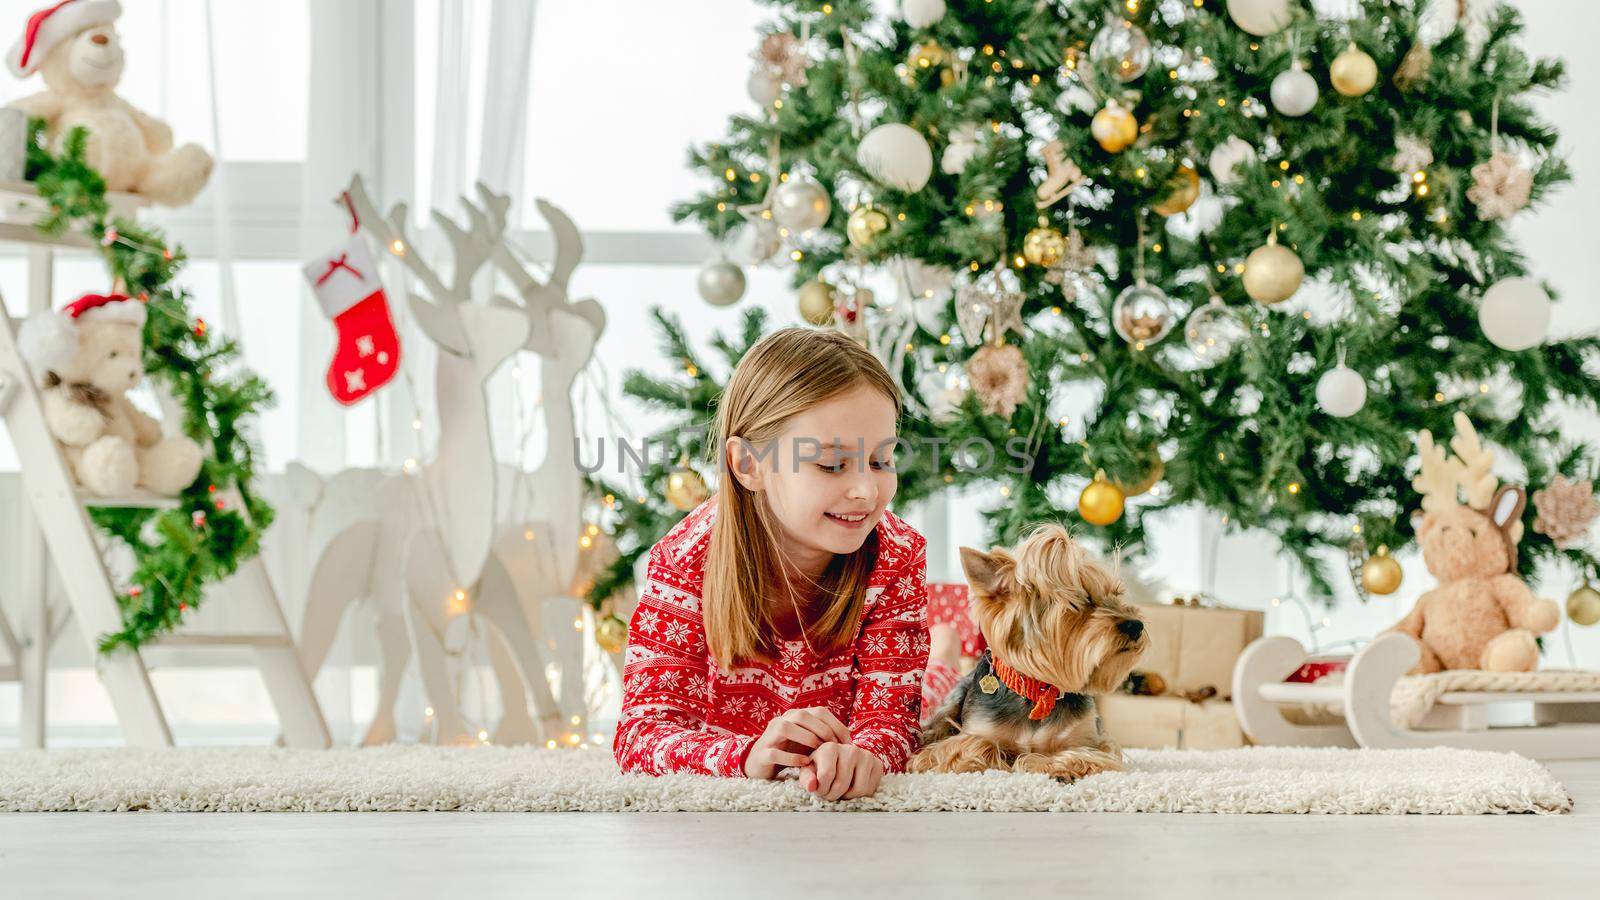 Child girl with dog lying on floor with Christmas tree on background. Kid celebrating New Year and smiling with doggy pet next to her